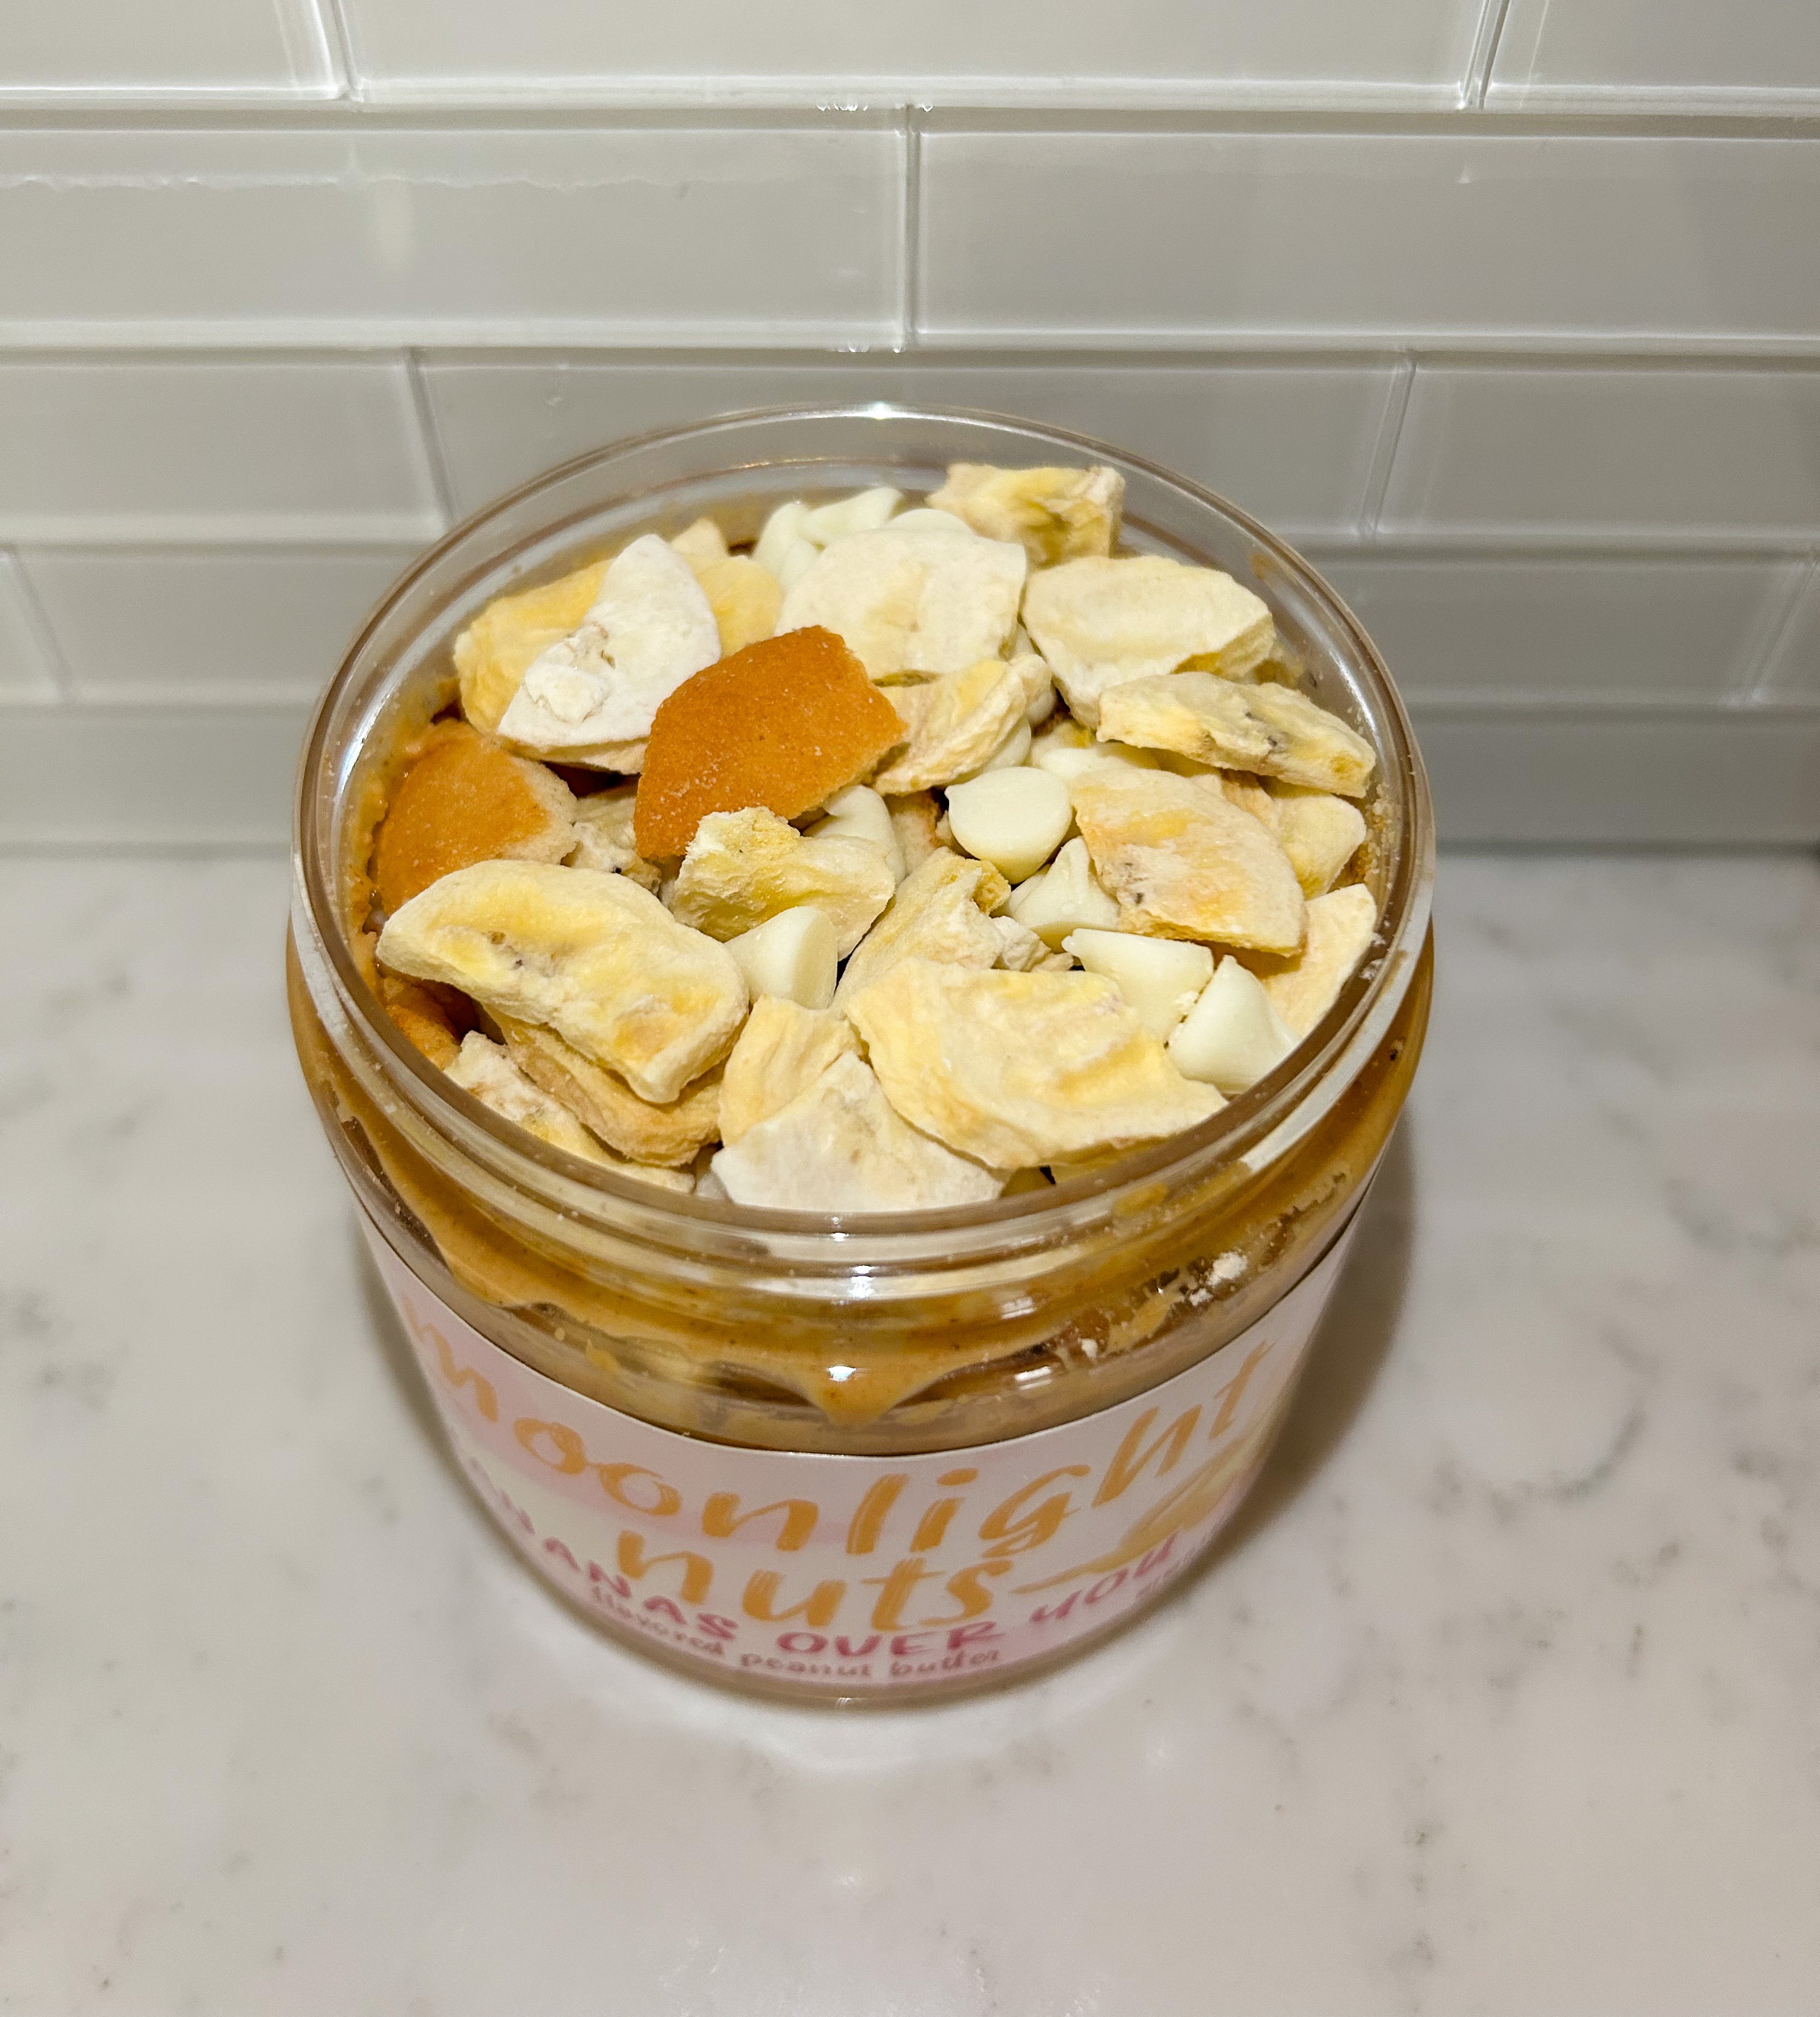 Bananas Over You- Flavored Peanut Butter